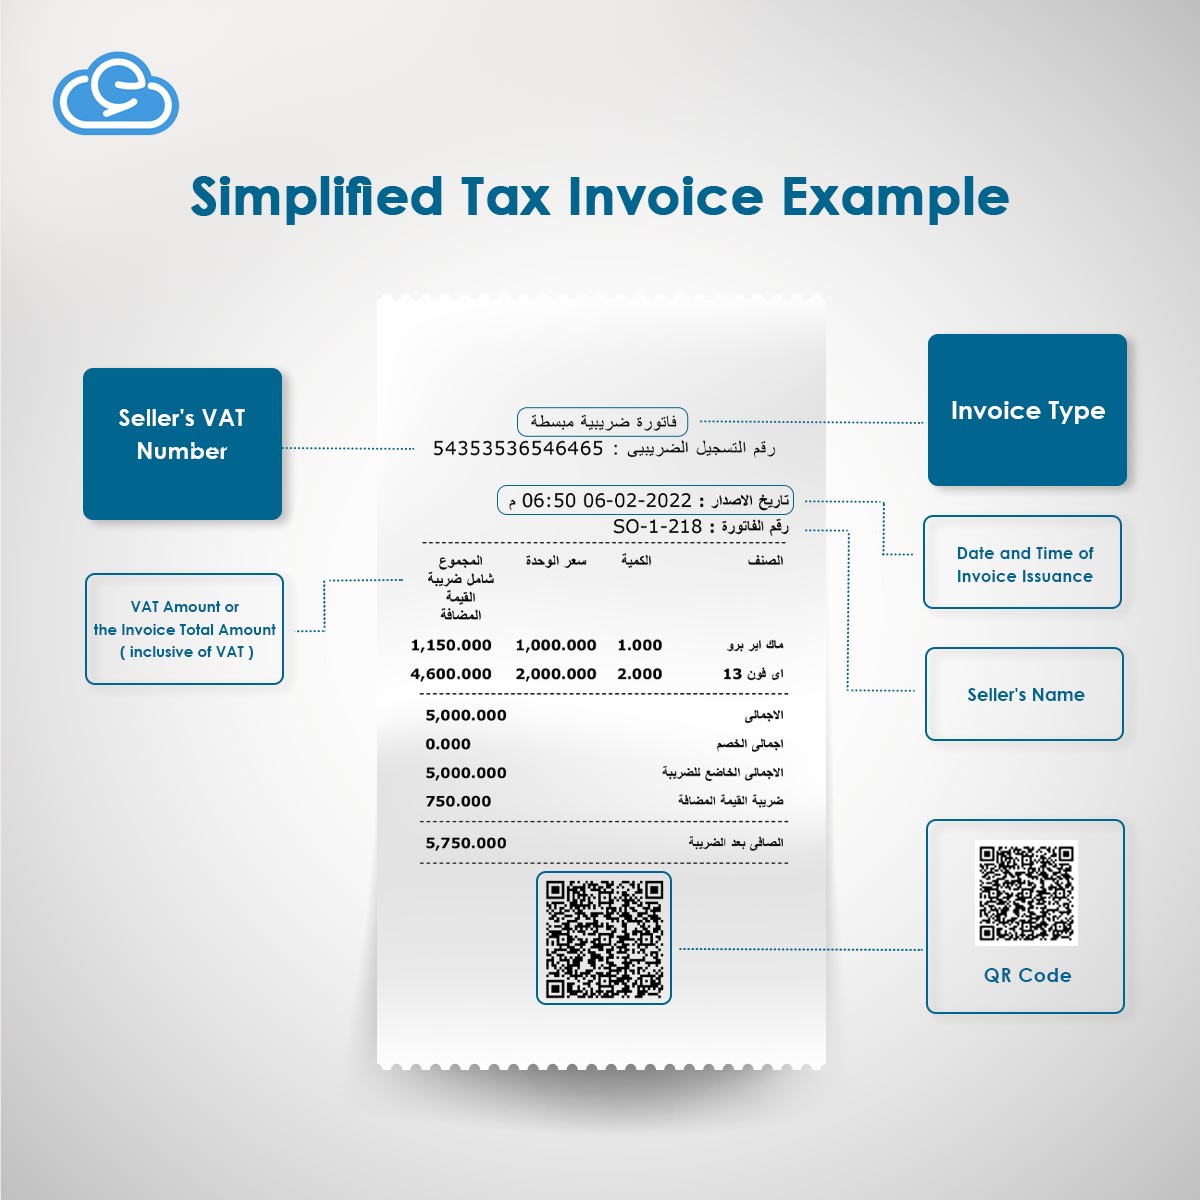 Simplified tax invoice example